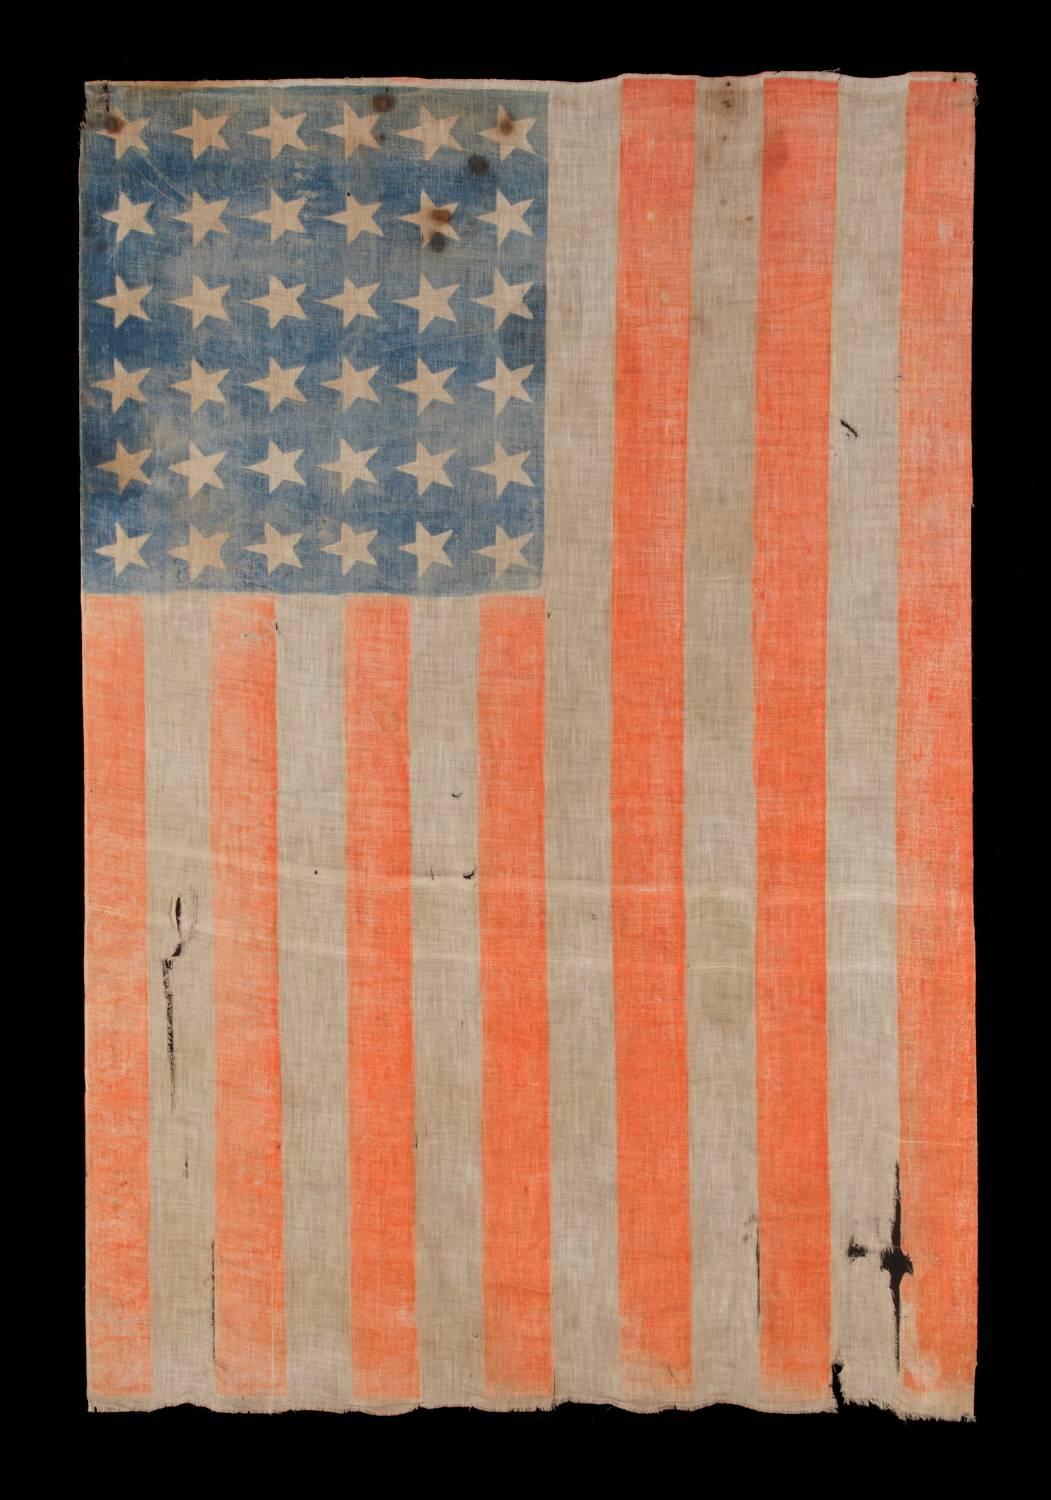 36 star antique American parade flag of the civil war era, in an especially large-scale and with endearing wear, 1864-1867, Nevada statehood:

36 star American national flag of the Civil War era, printed on coarse, glazed cotton. 36 star American